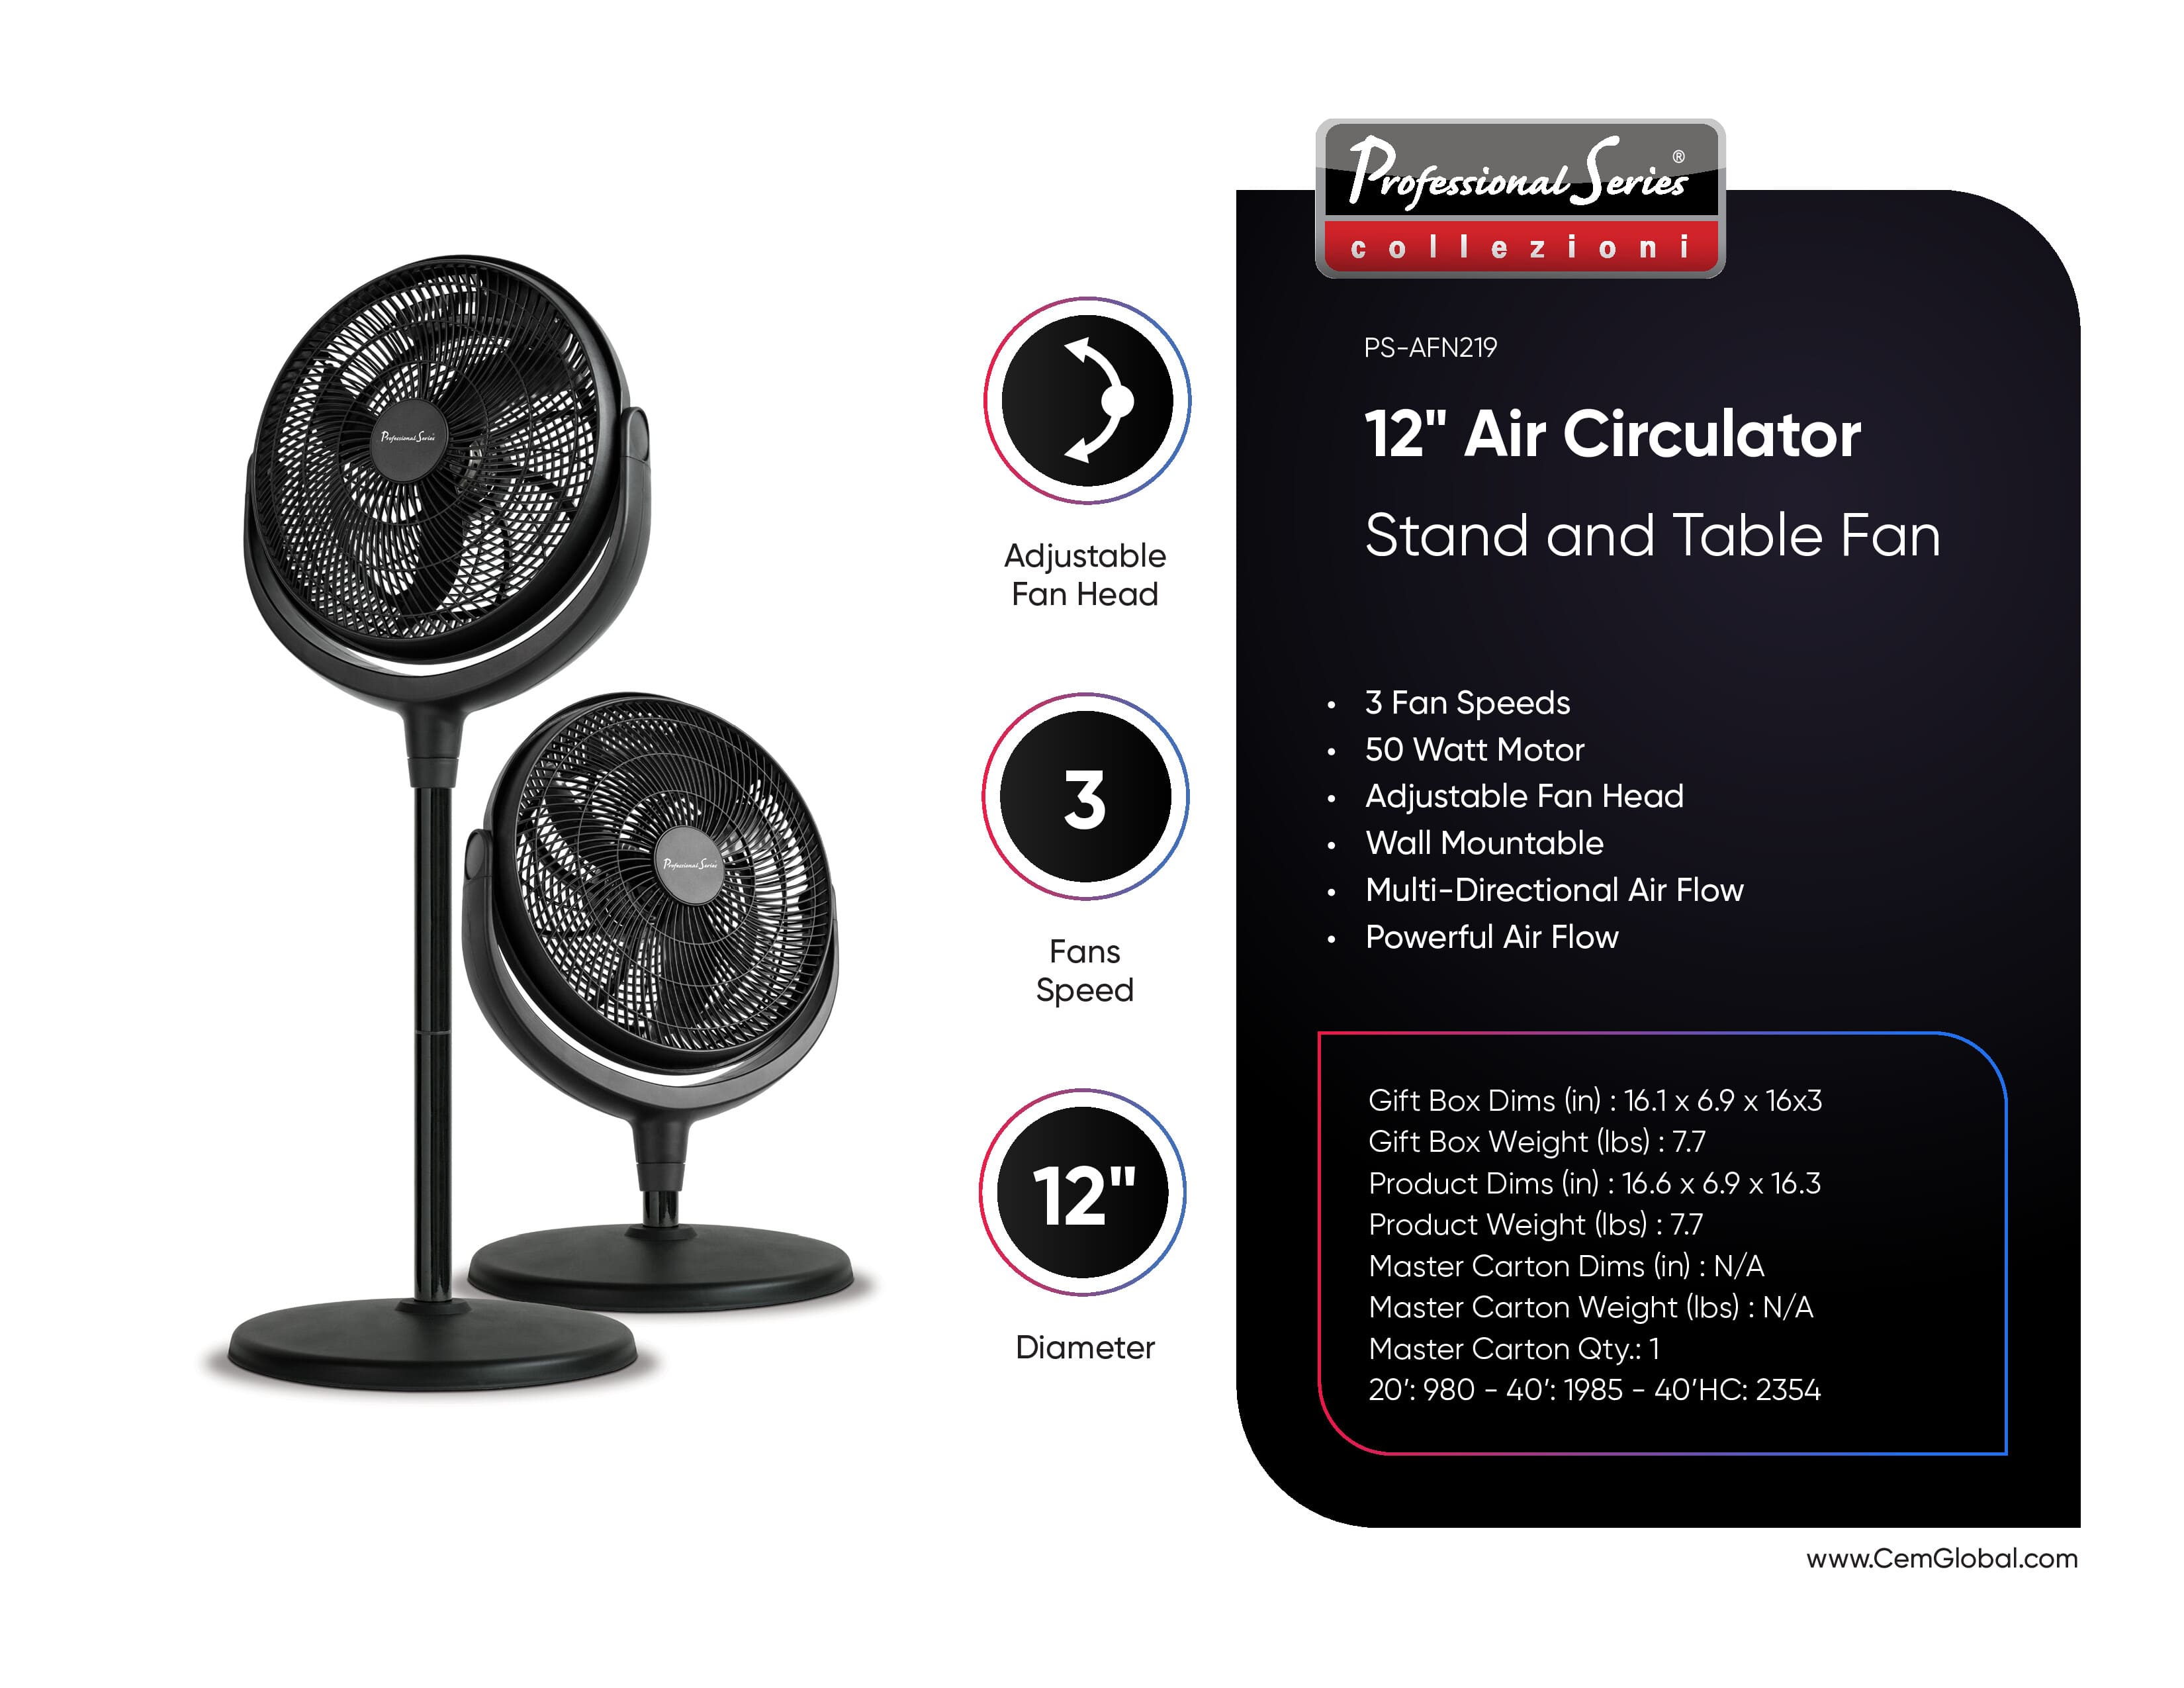 12" Air Circulator Stand and Table Fan